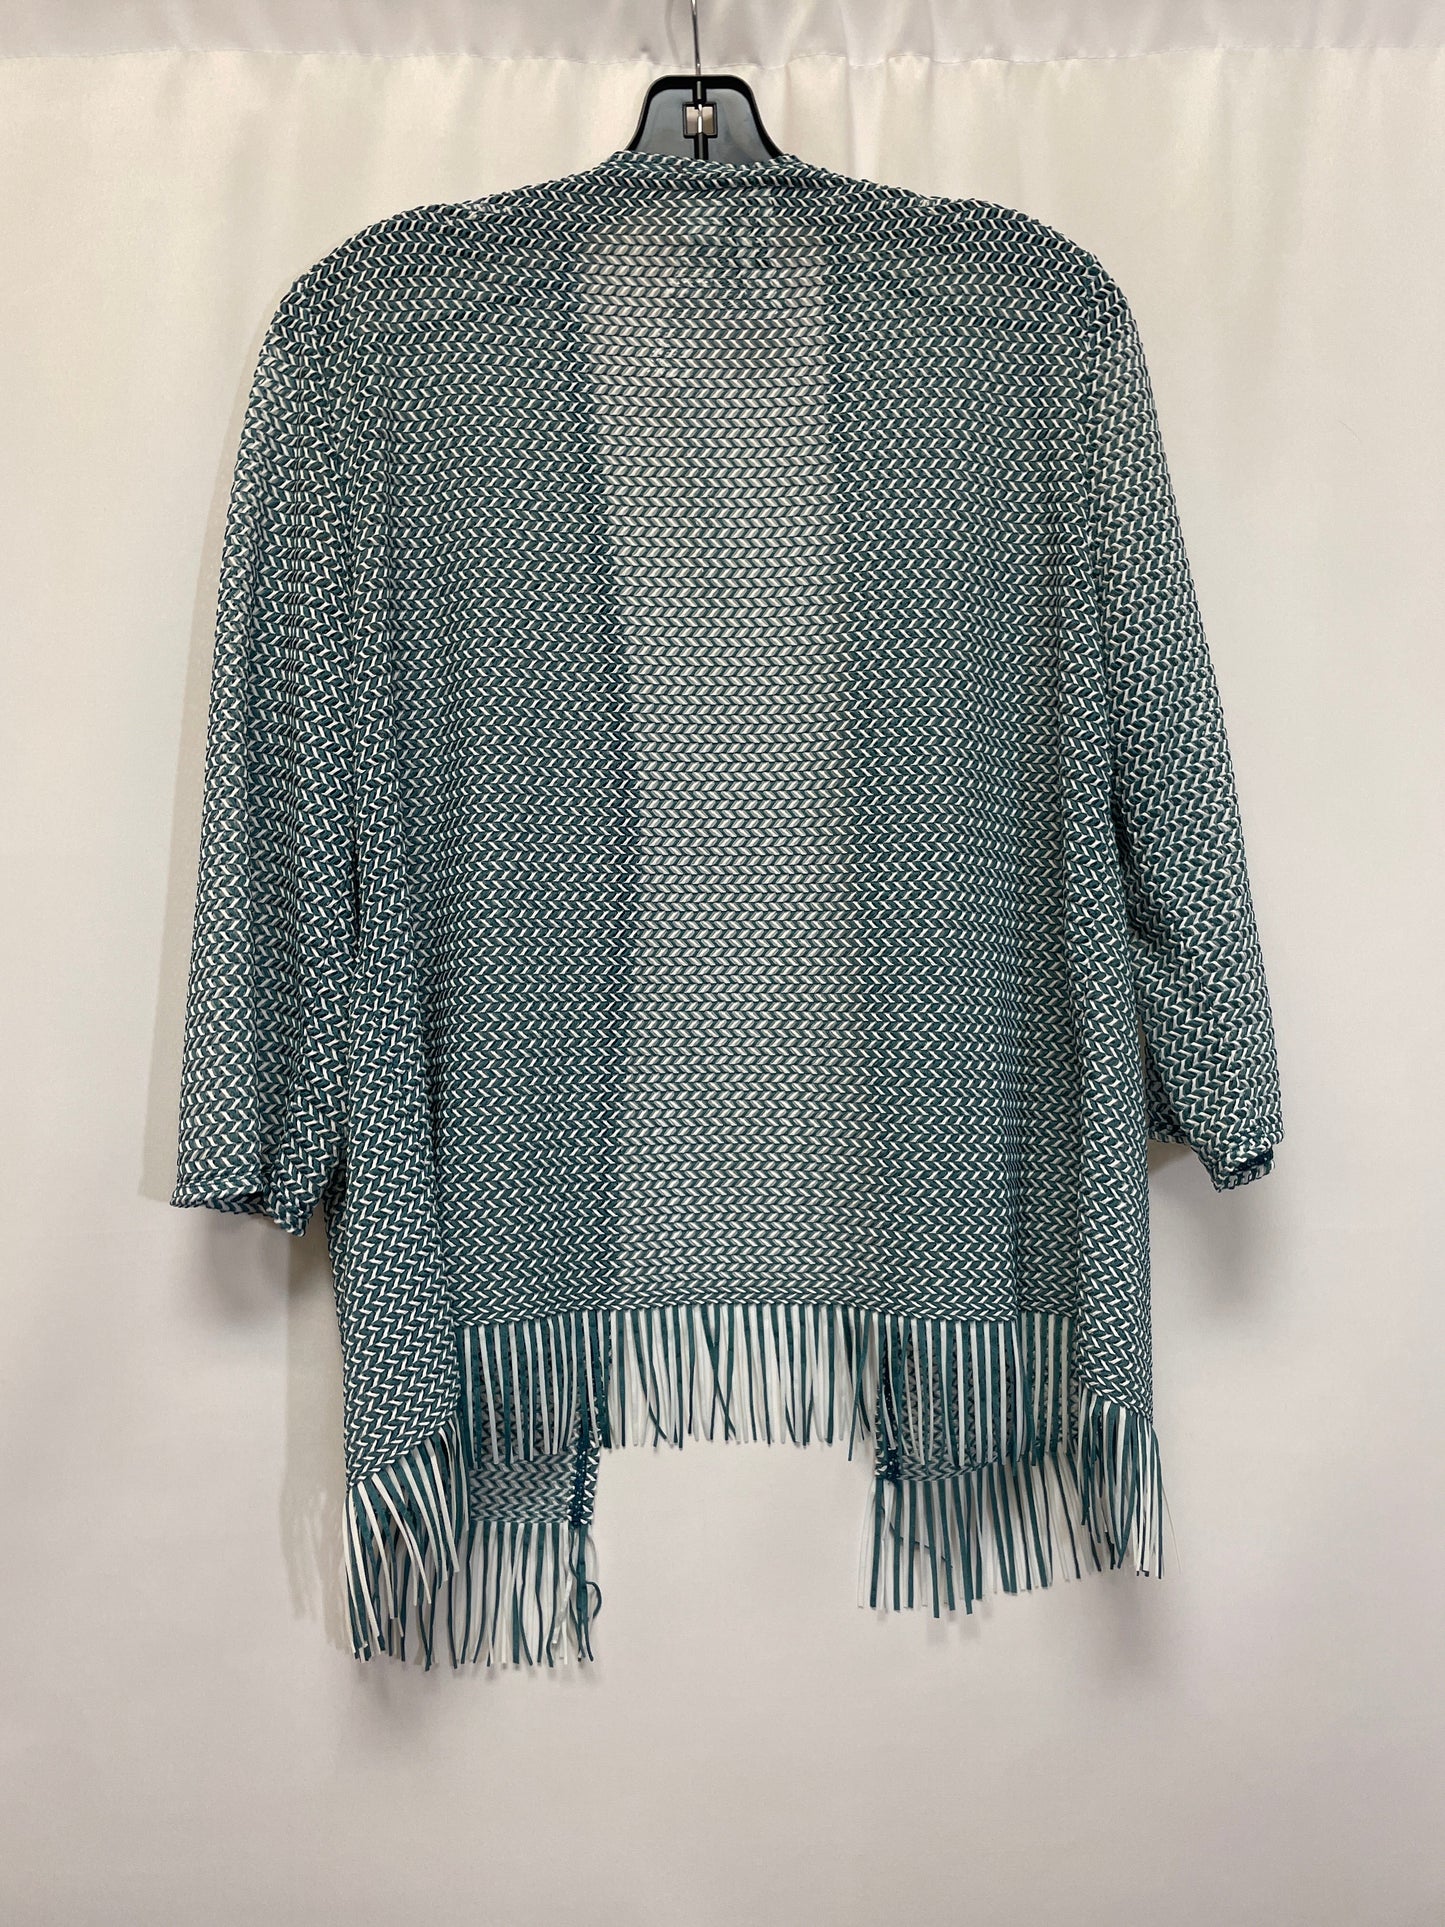 Teal Cardigan Chicos, Size M